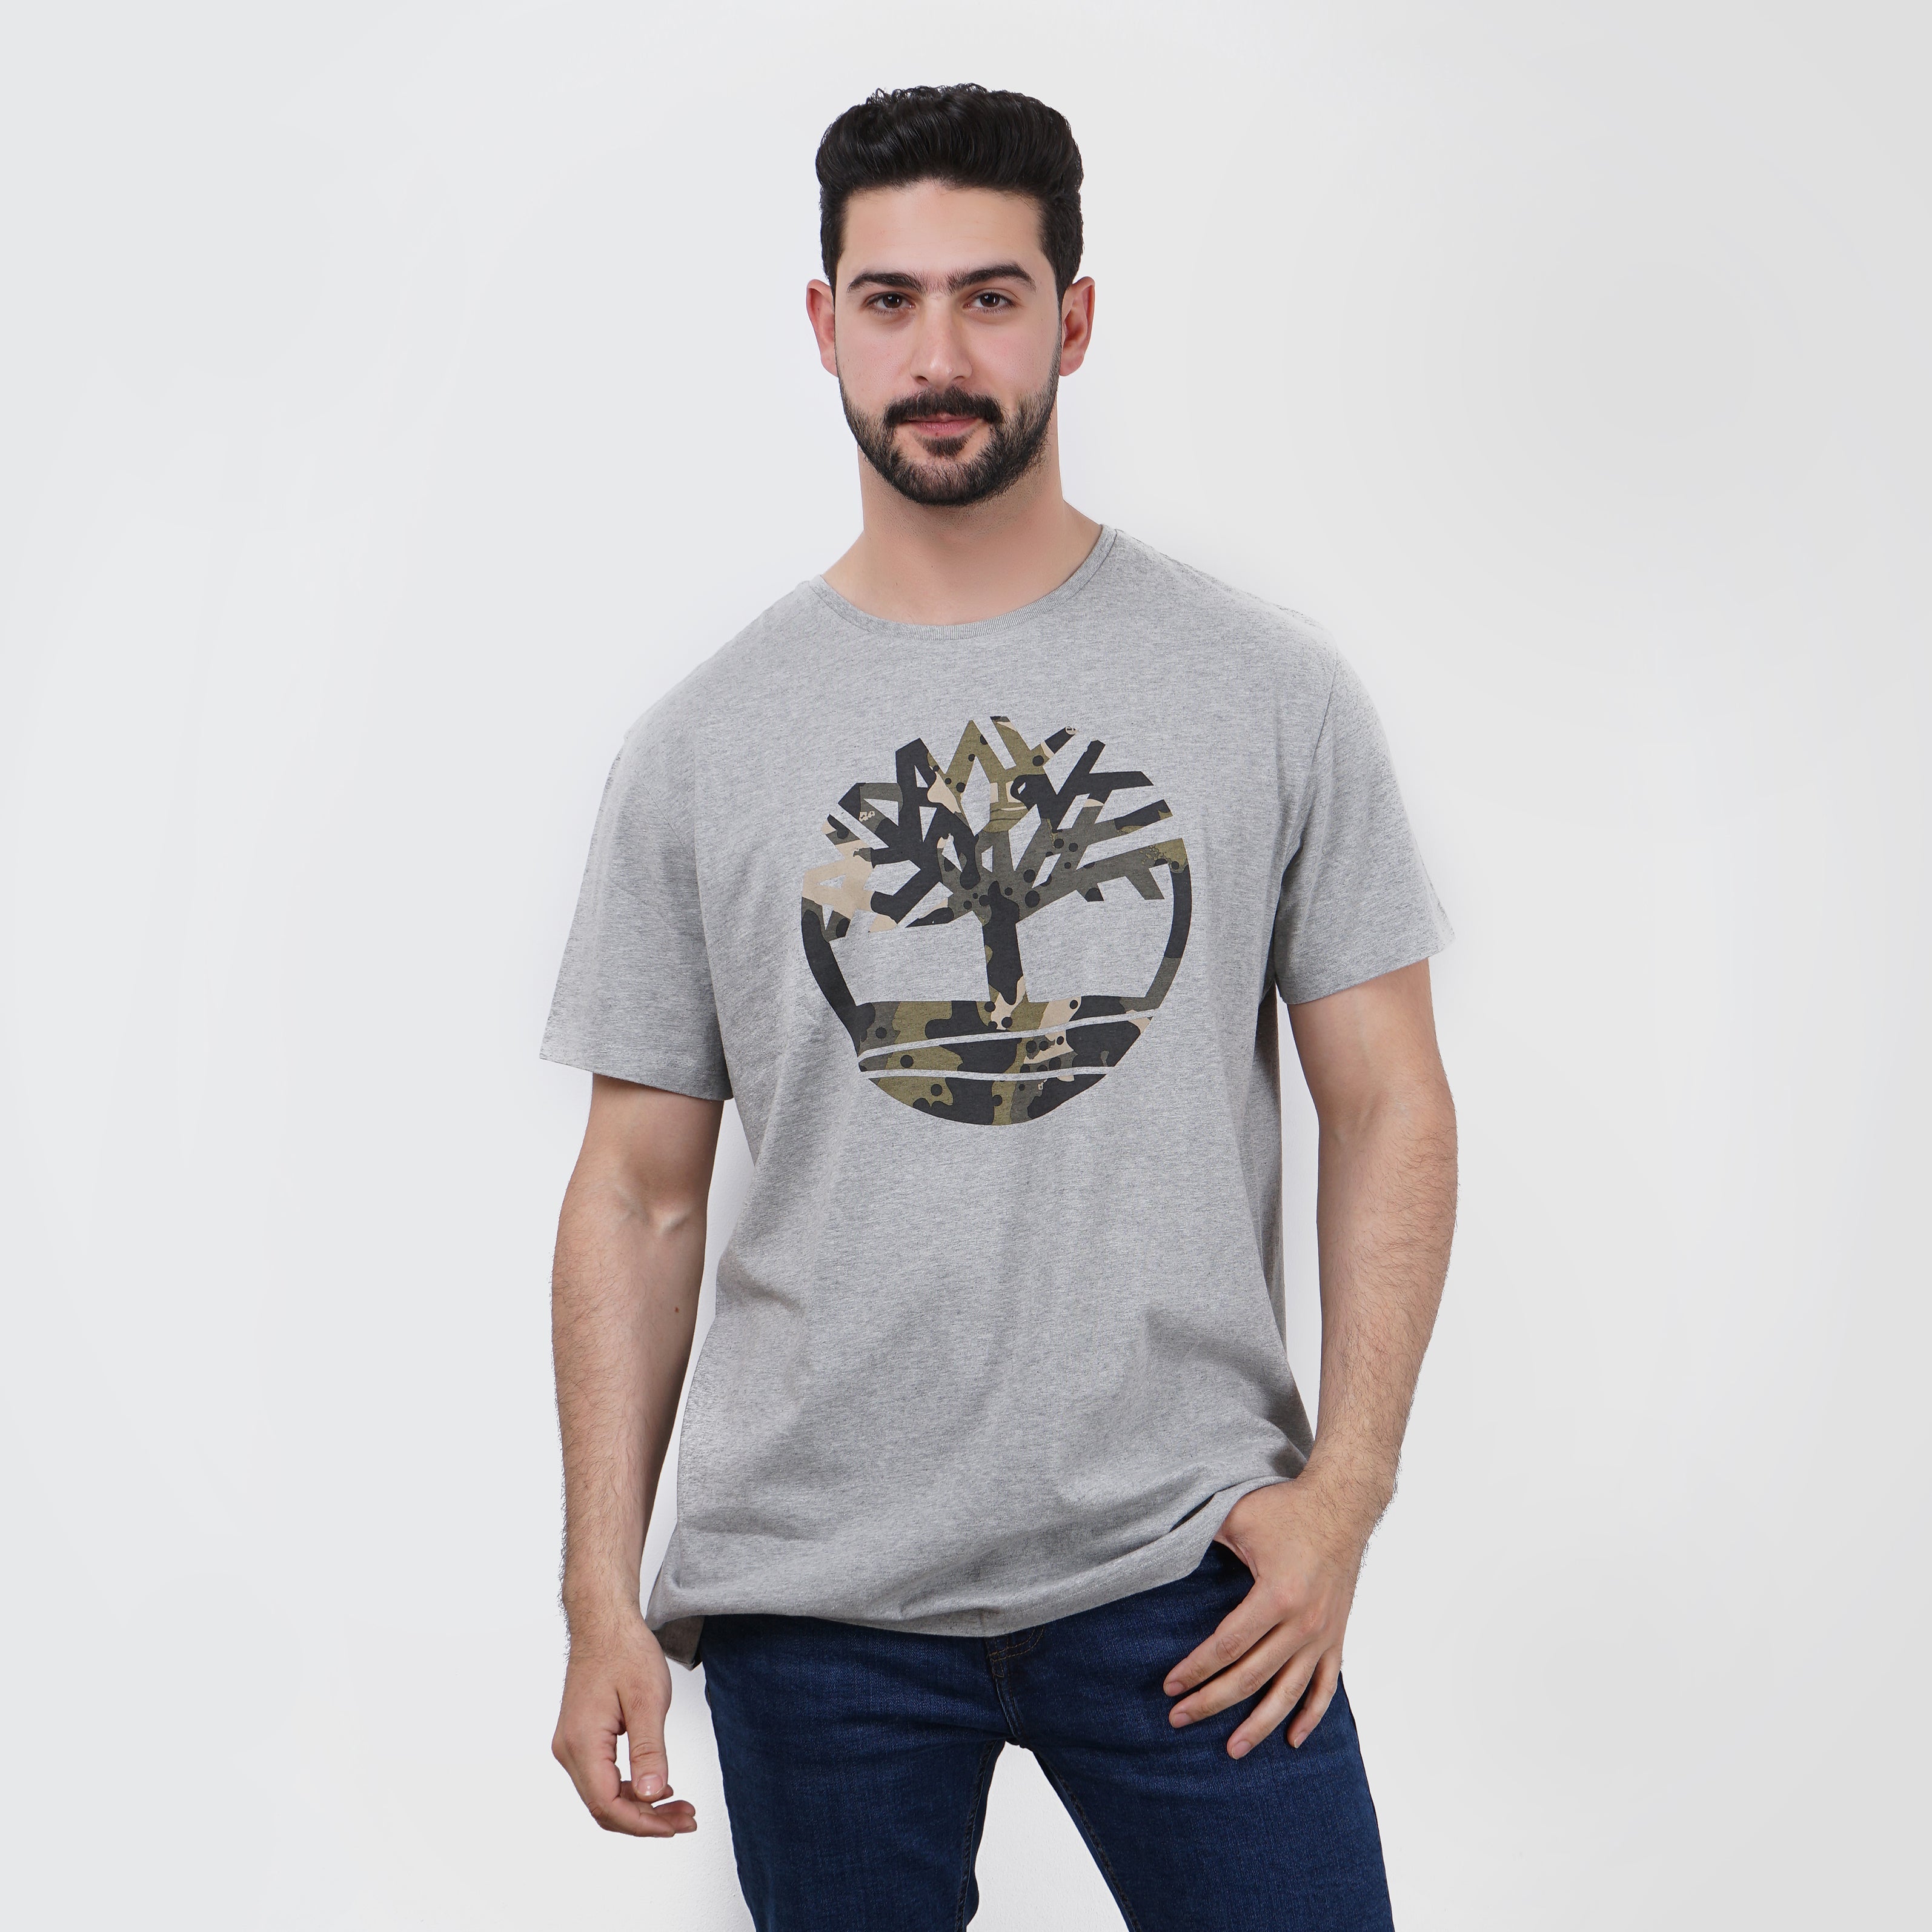 Man modeling a gray camouflage Timberland graphic t-shirt and blue jeans.